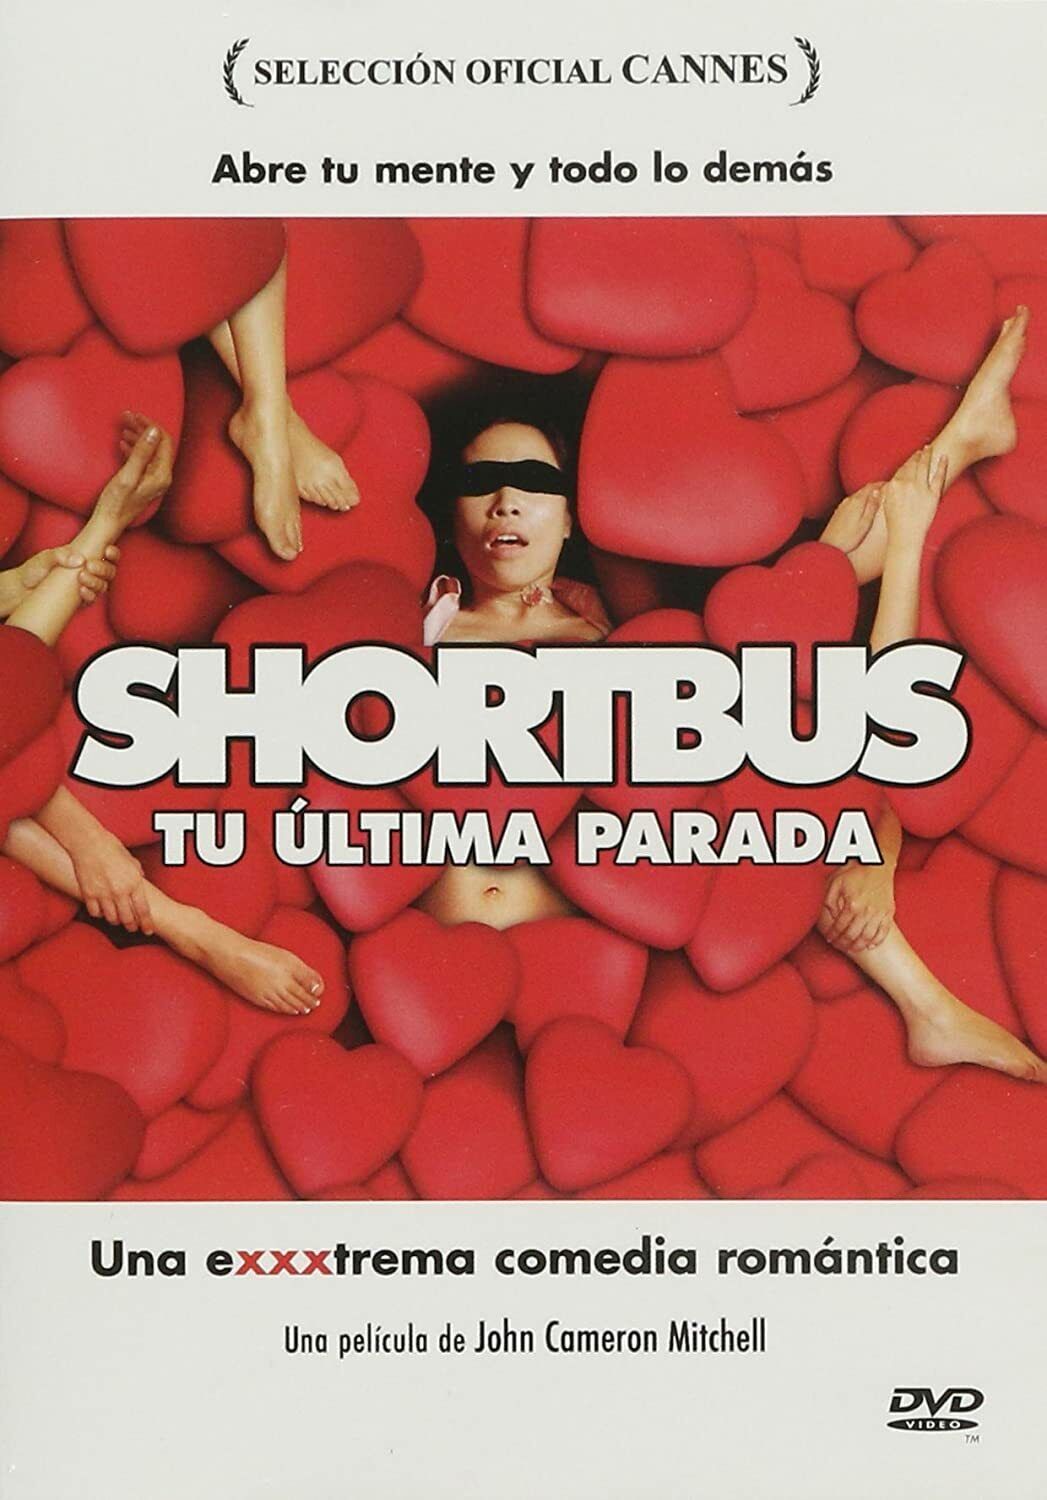 abraham trujillo recommends short bus movie online pic